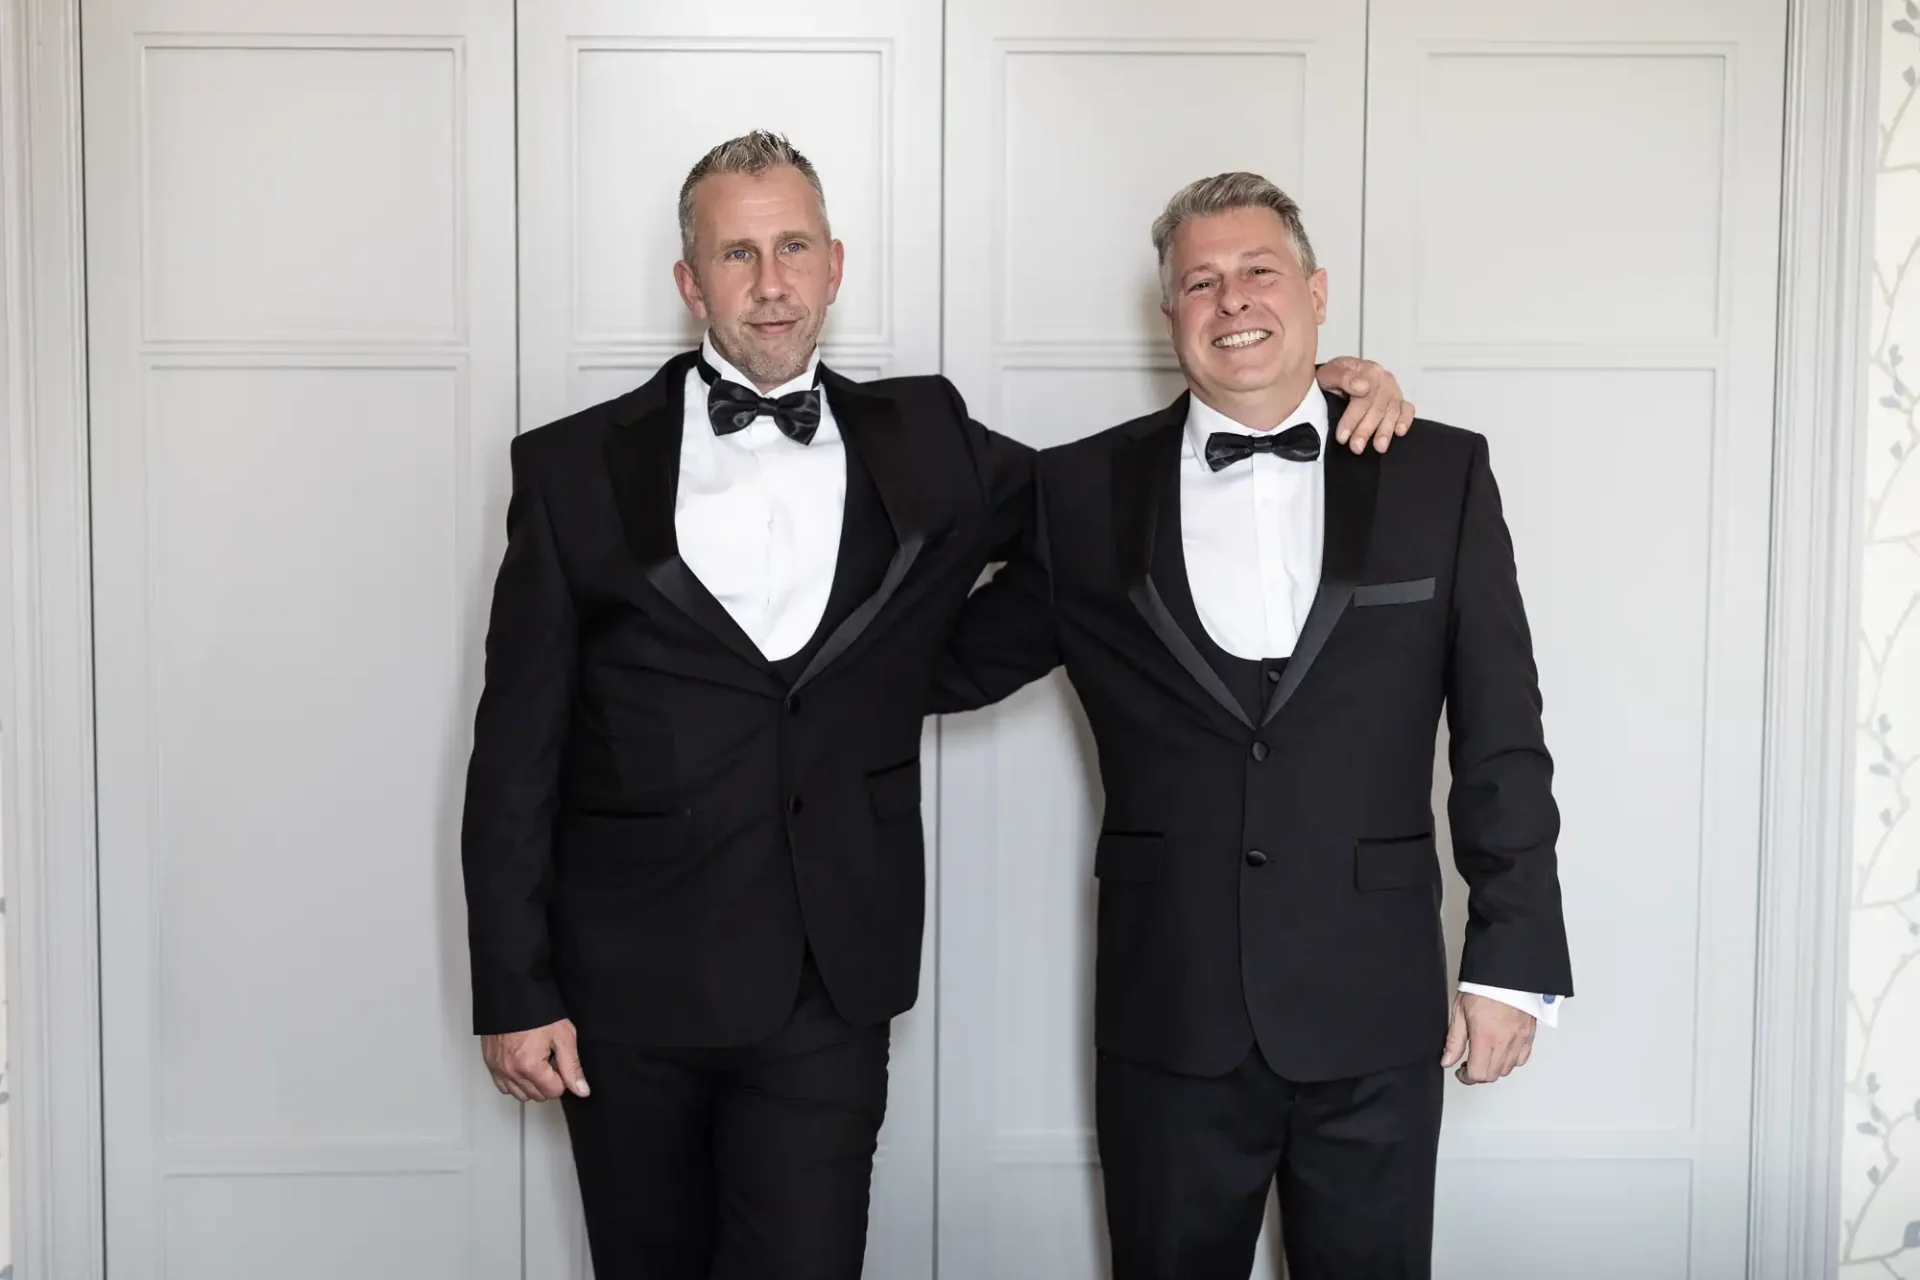 Two smiling men in tuxedos standing arm in arm in a room with white paneled walls.